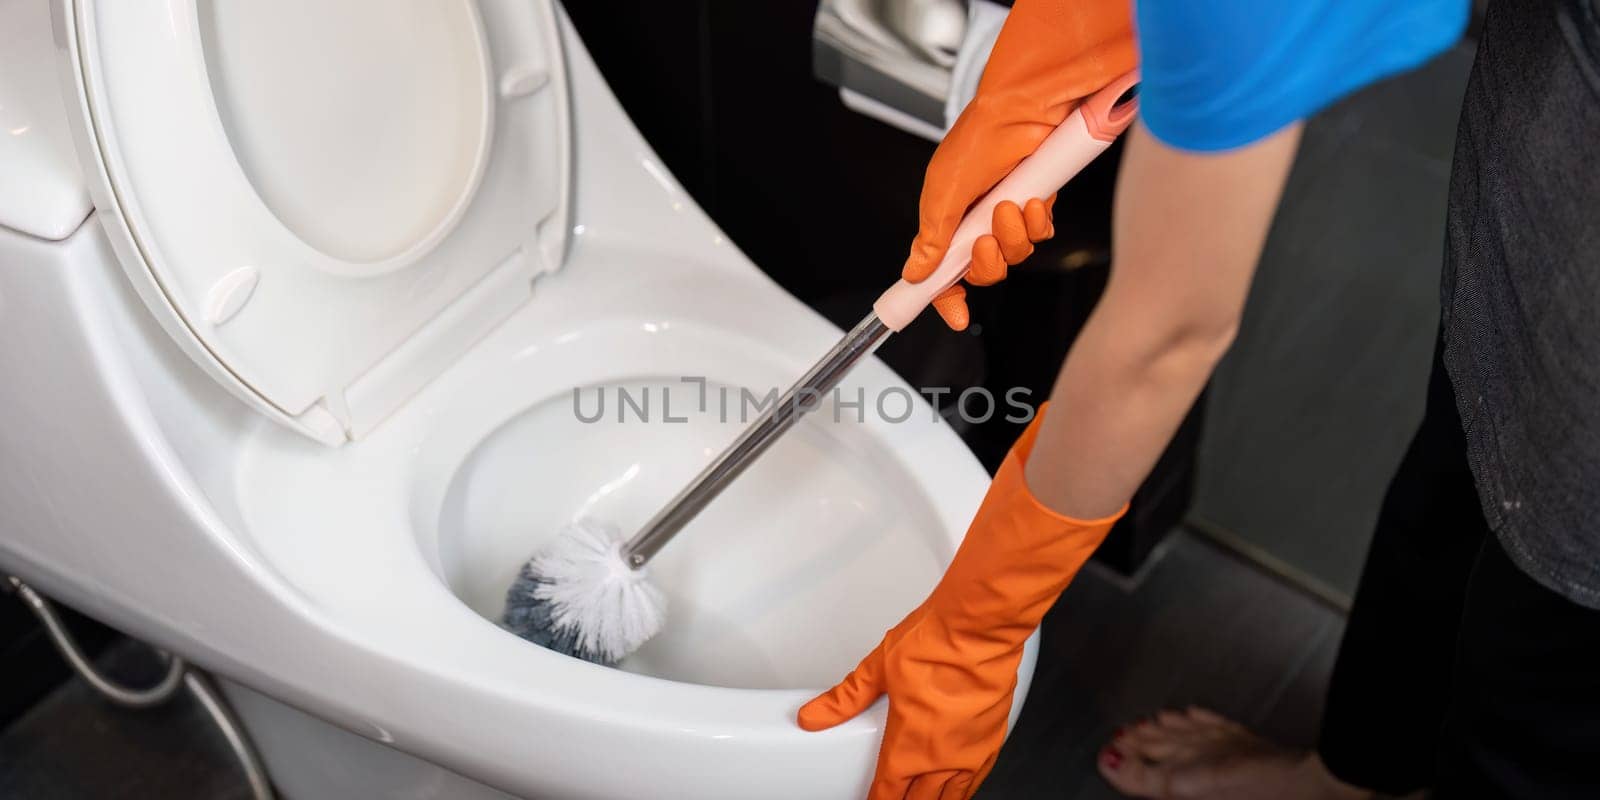 Professional cleaning service company employee in rubber gloves cleaning a toilet bowl in bathroom.